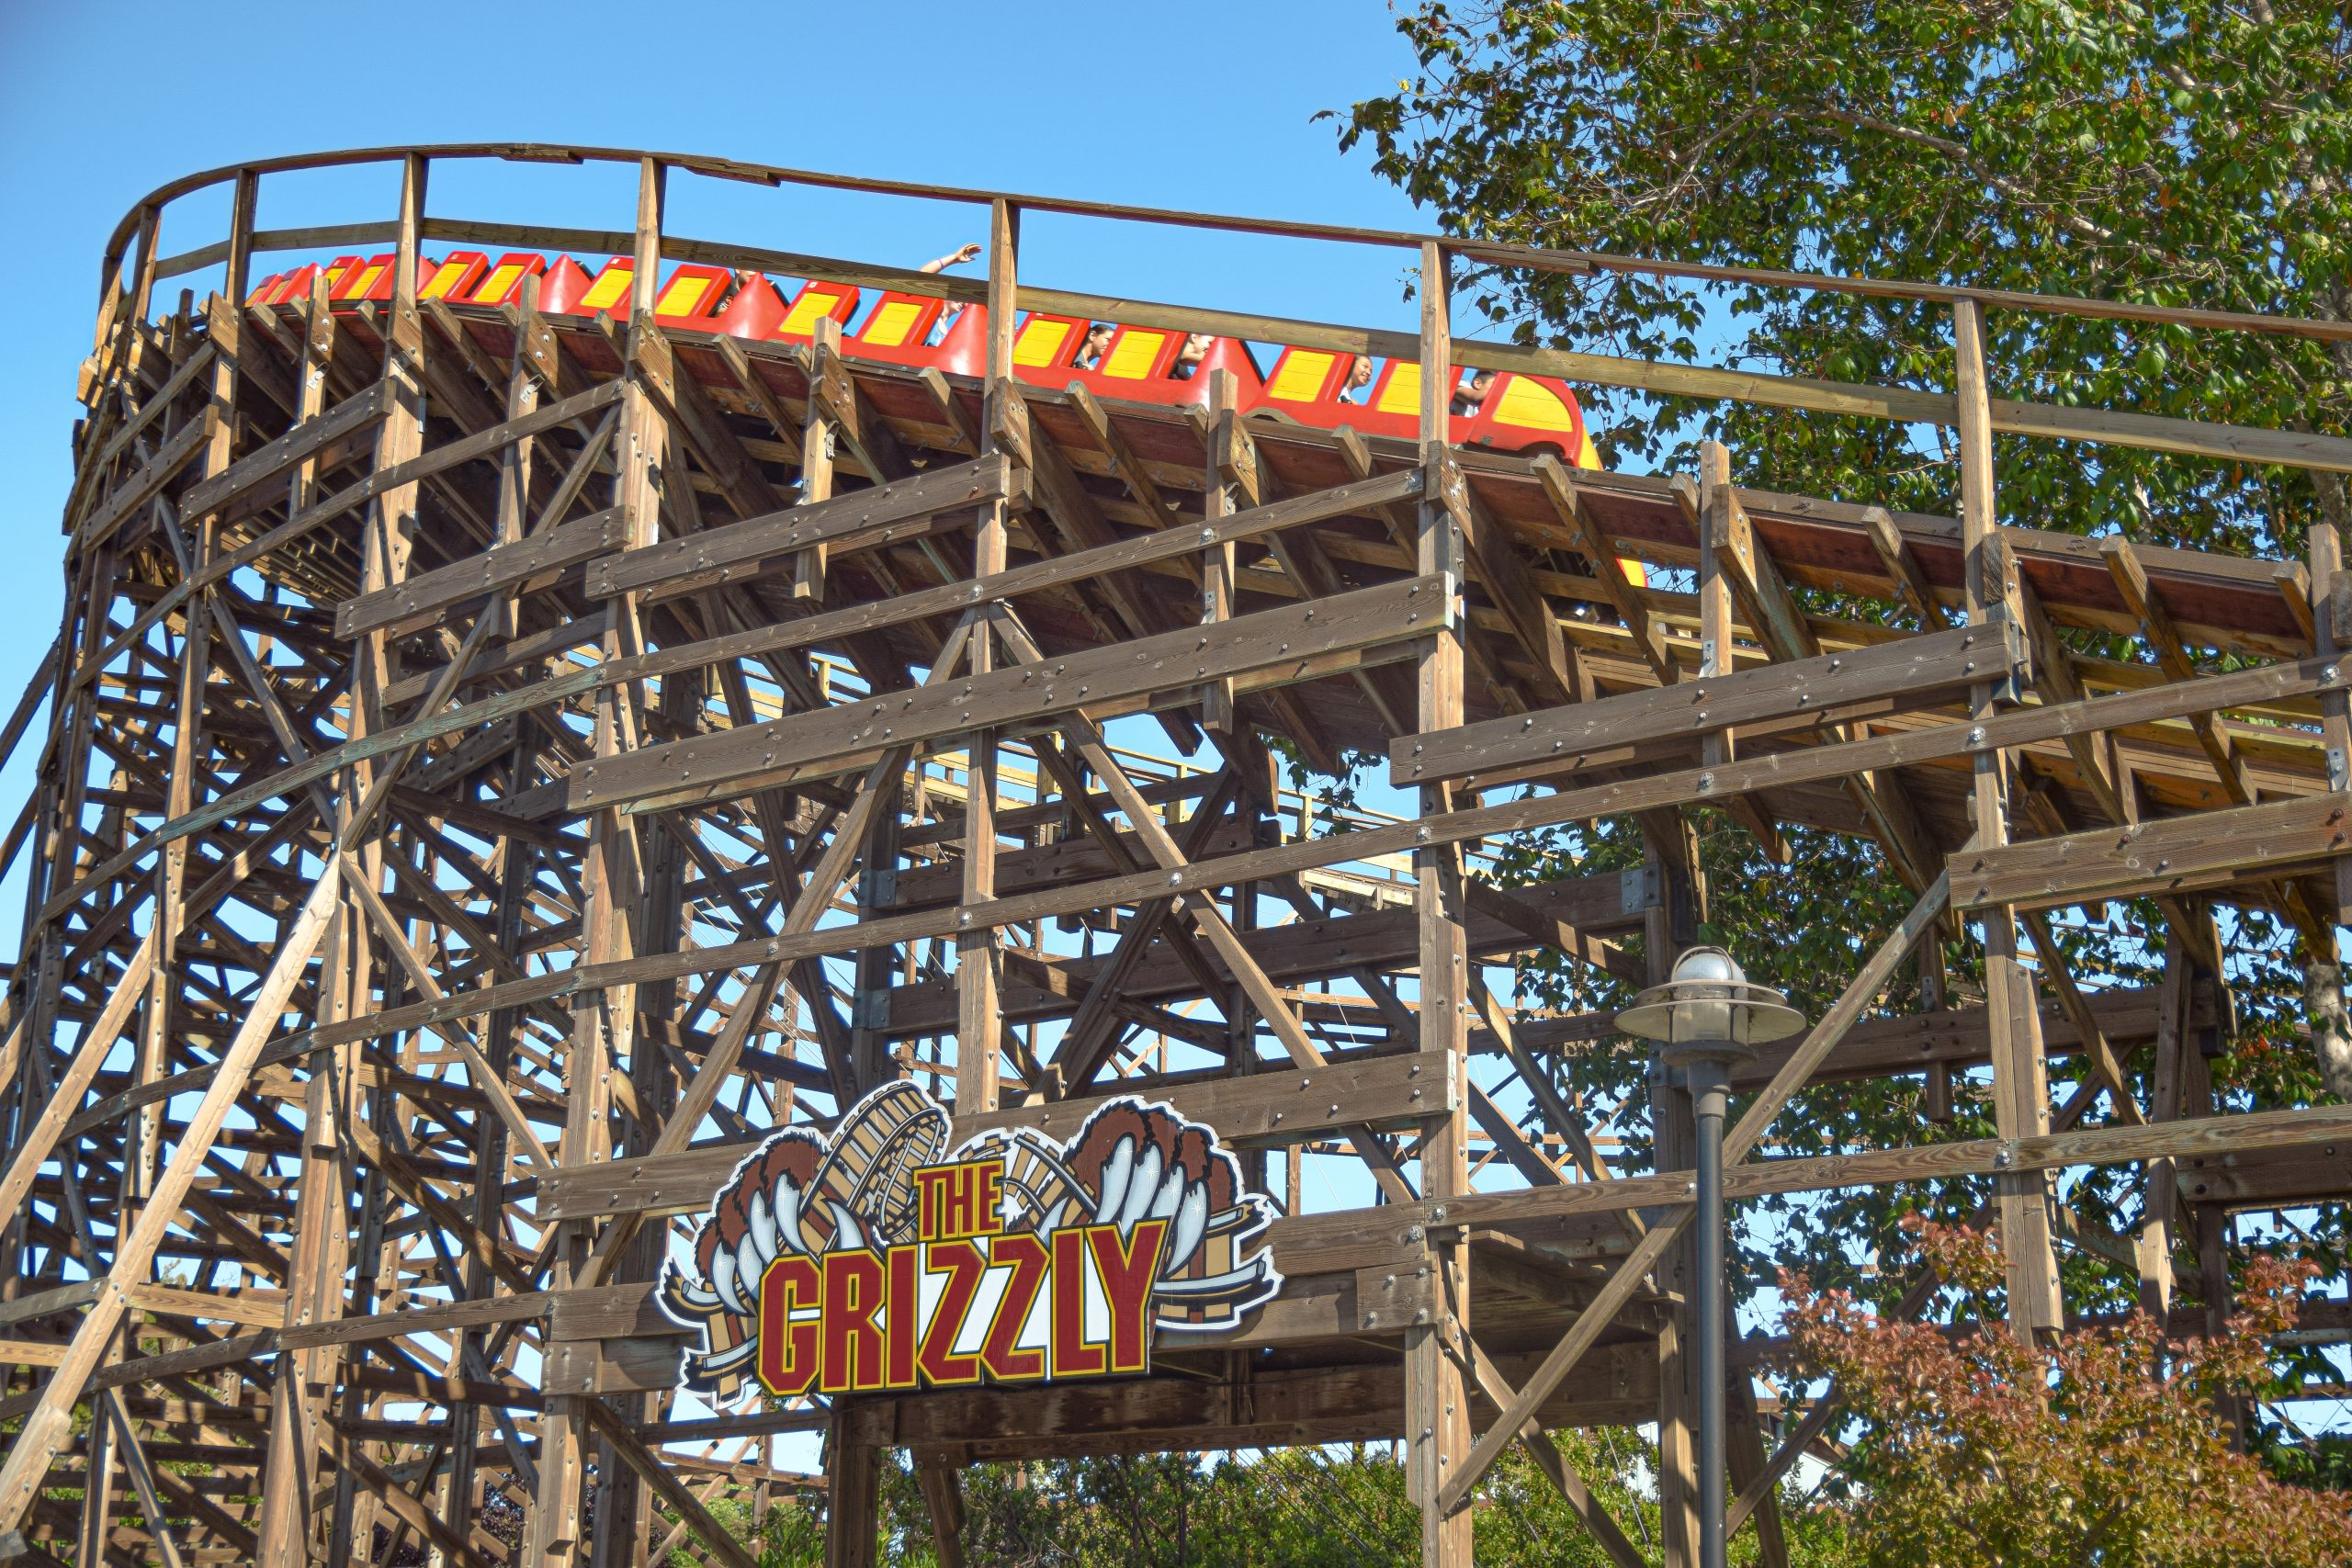 File:Excalibur and The Roller Coaster.jpg - Wikimedia Commons